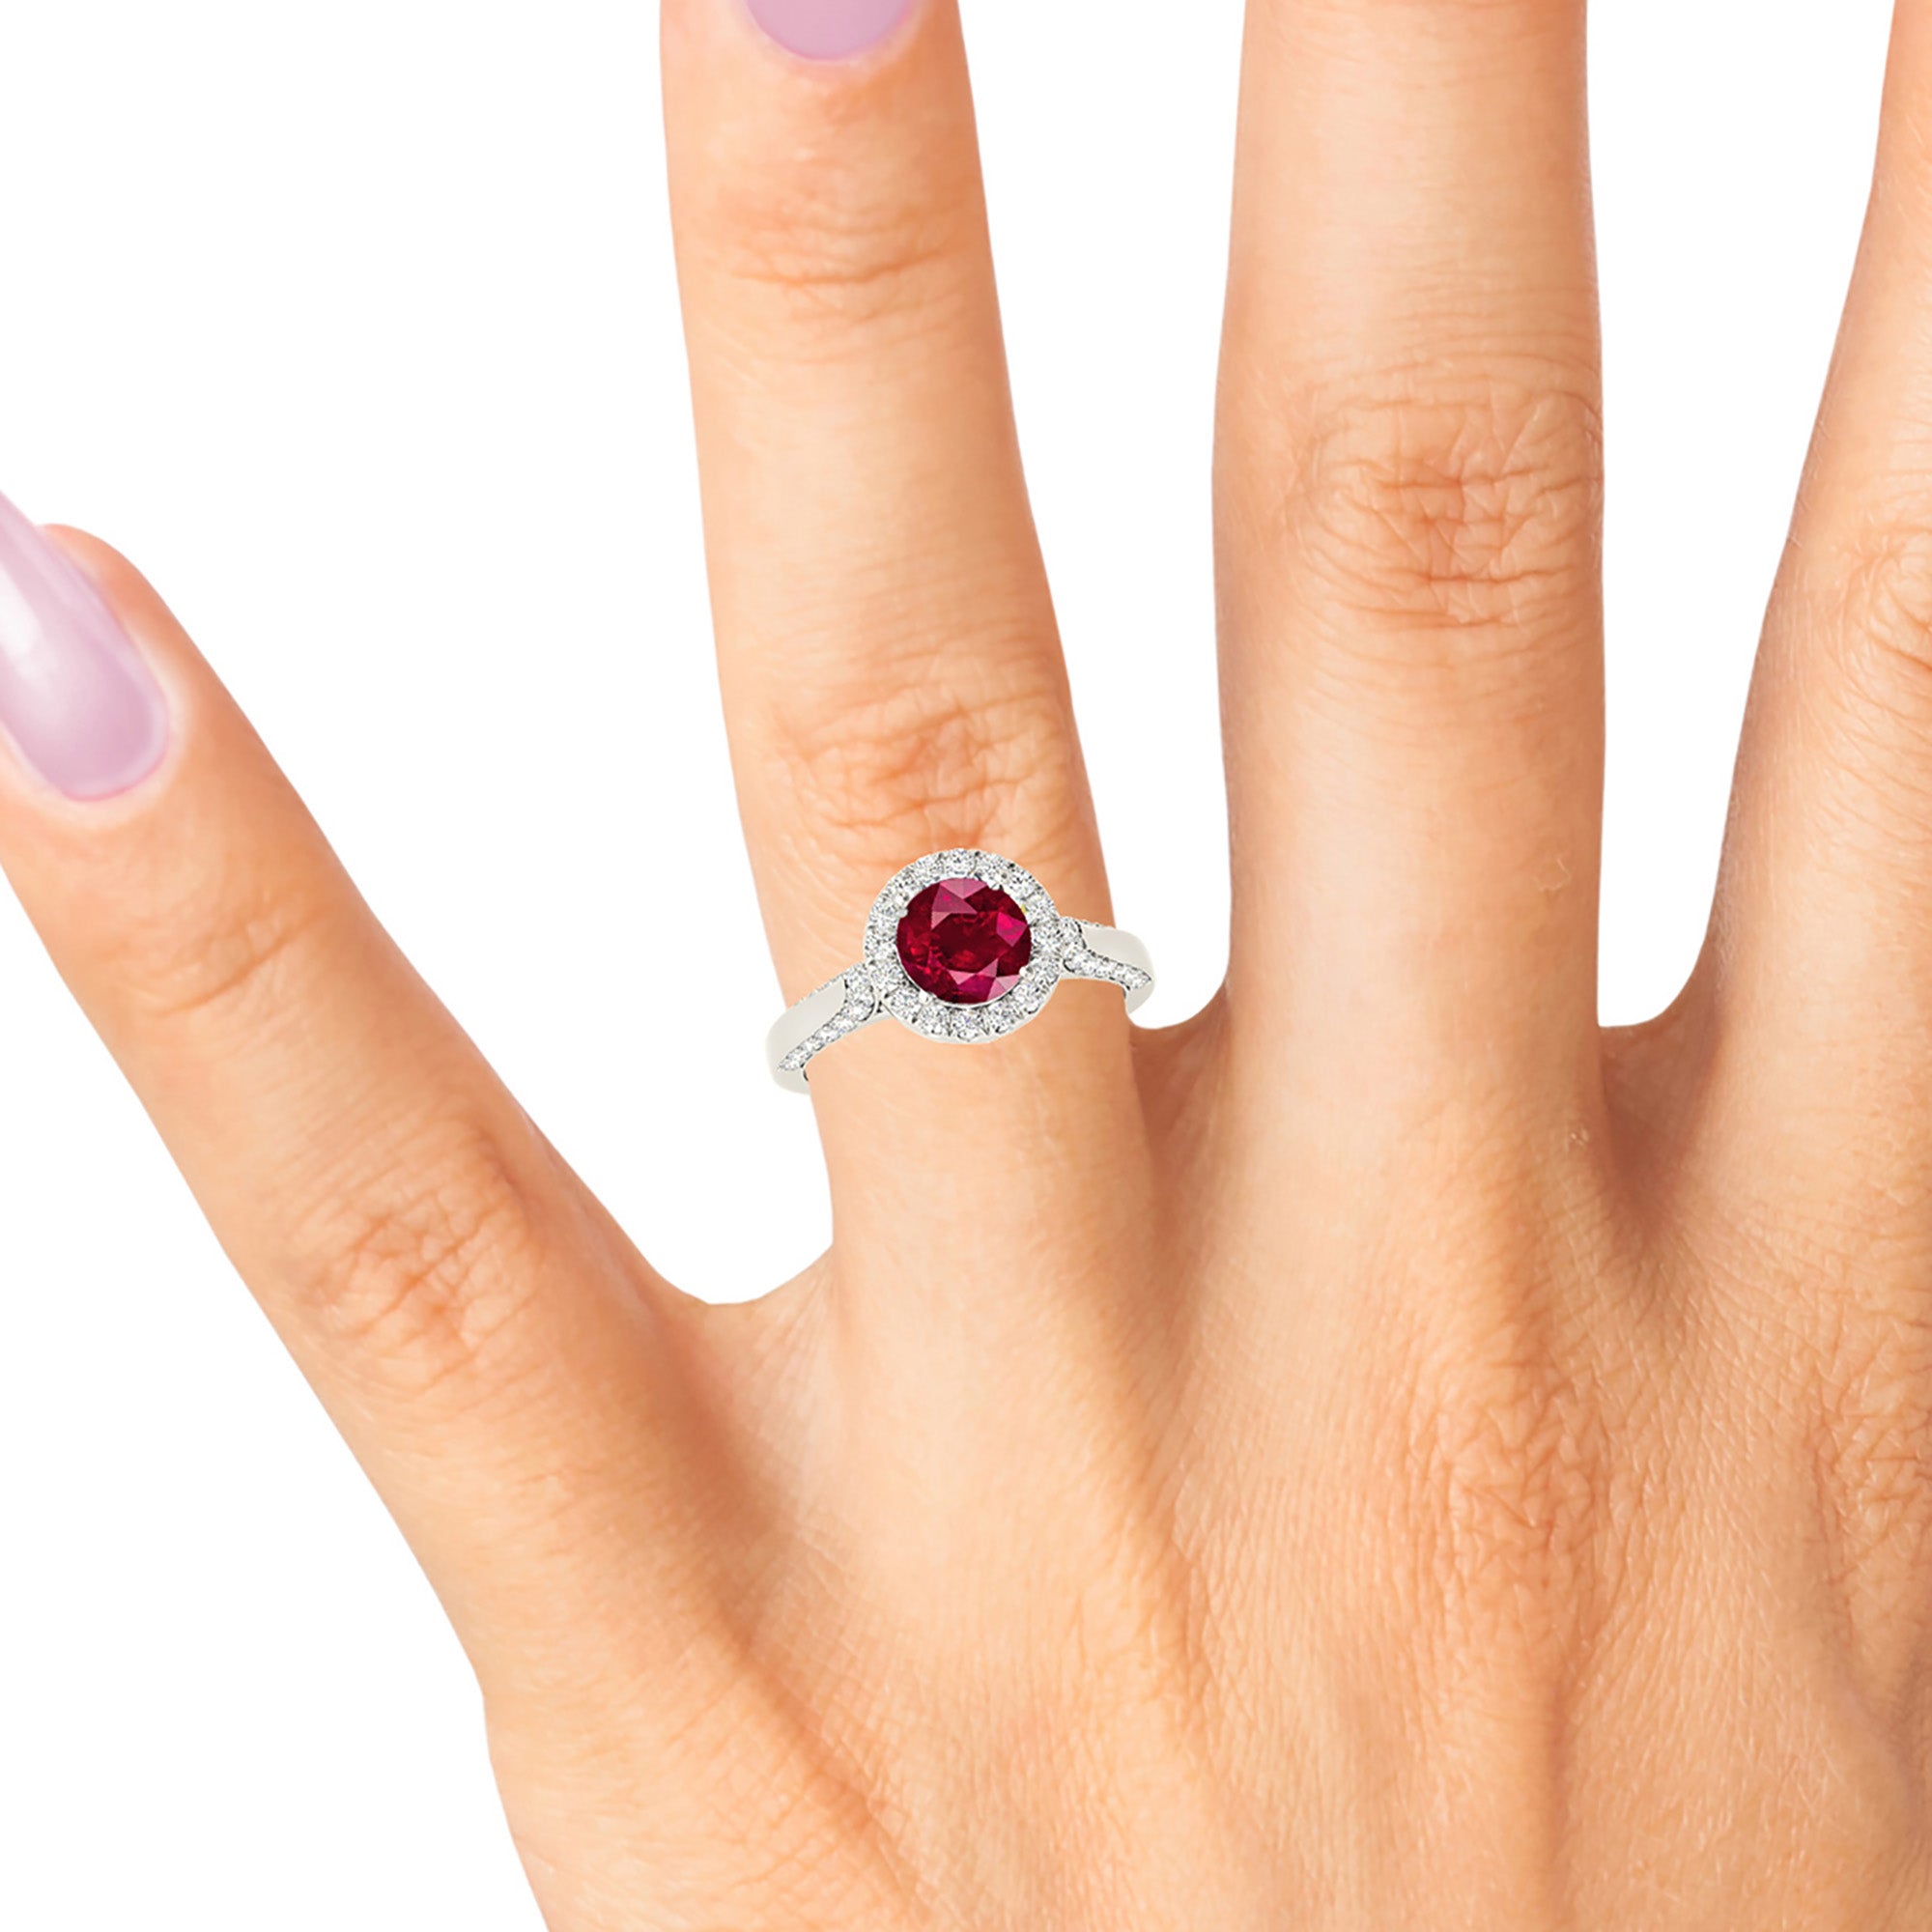 1.79 ct. Genuine Ruby Ring With 0.55 ctw. Diamond Halo And Side Accent Diamonds-in 14K/18K White, Yellow, Rose Gold and Platinum - Christmas Jewelry Gift -VIRABYANI